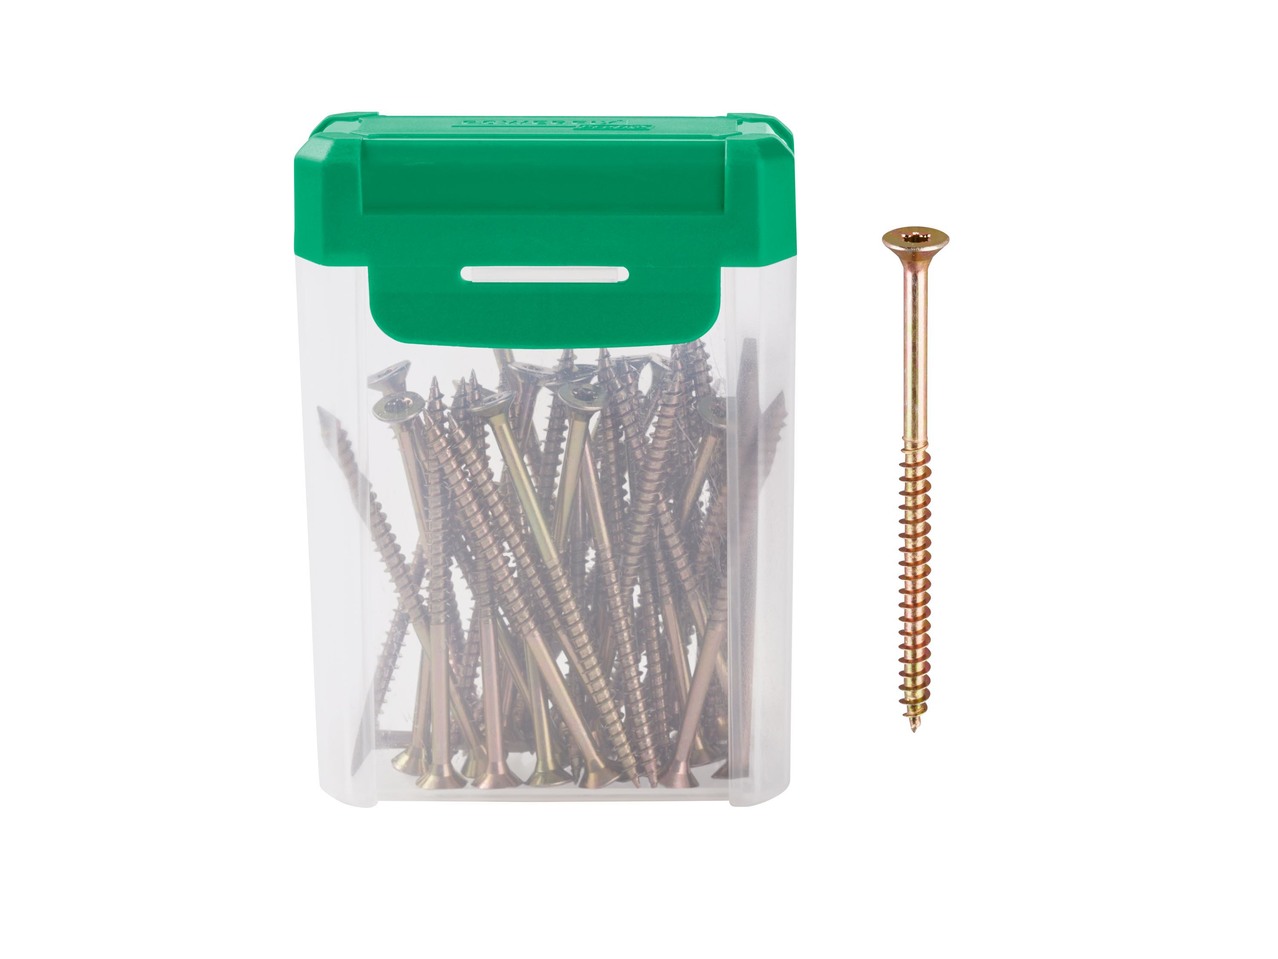 Screws/Wall Plugs or Nails